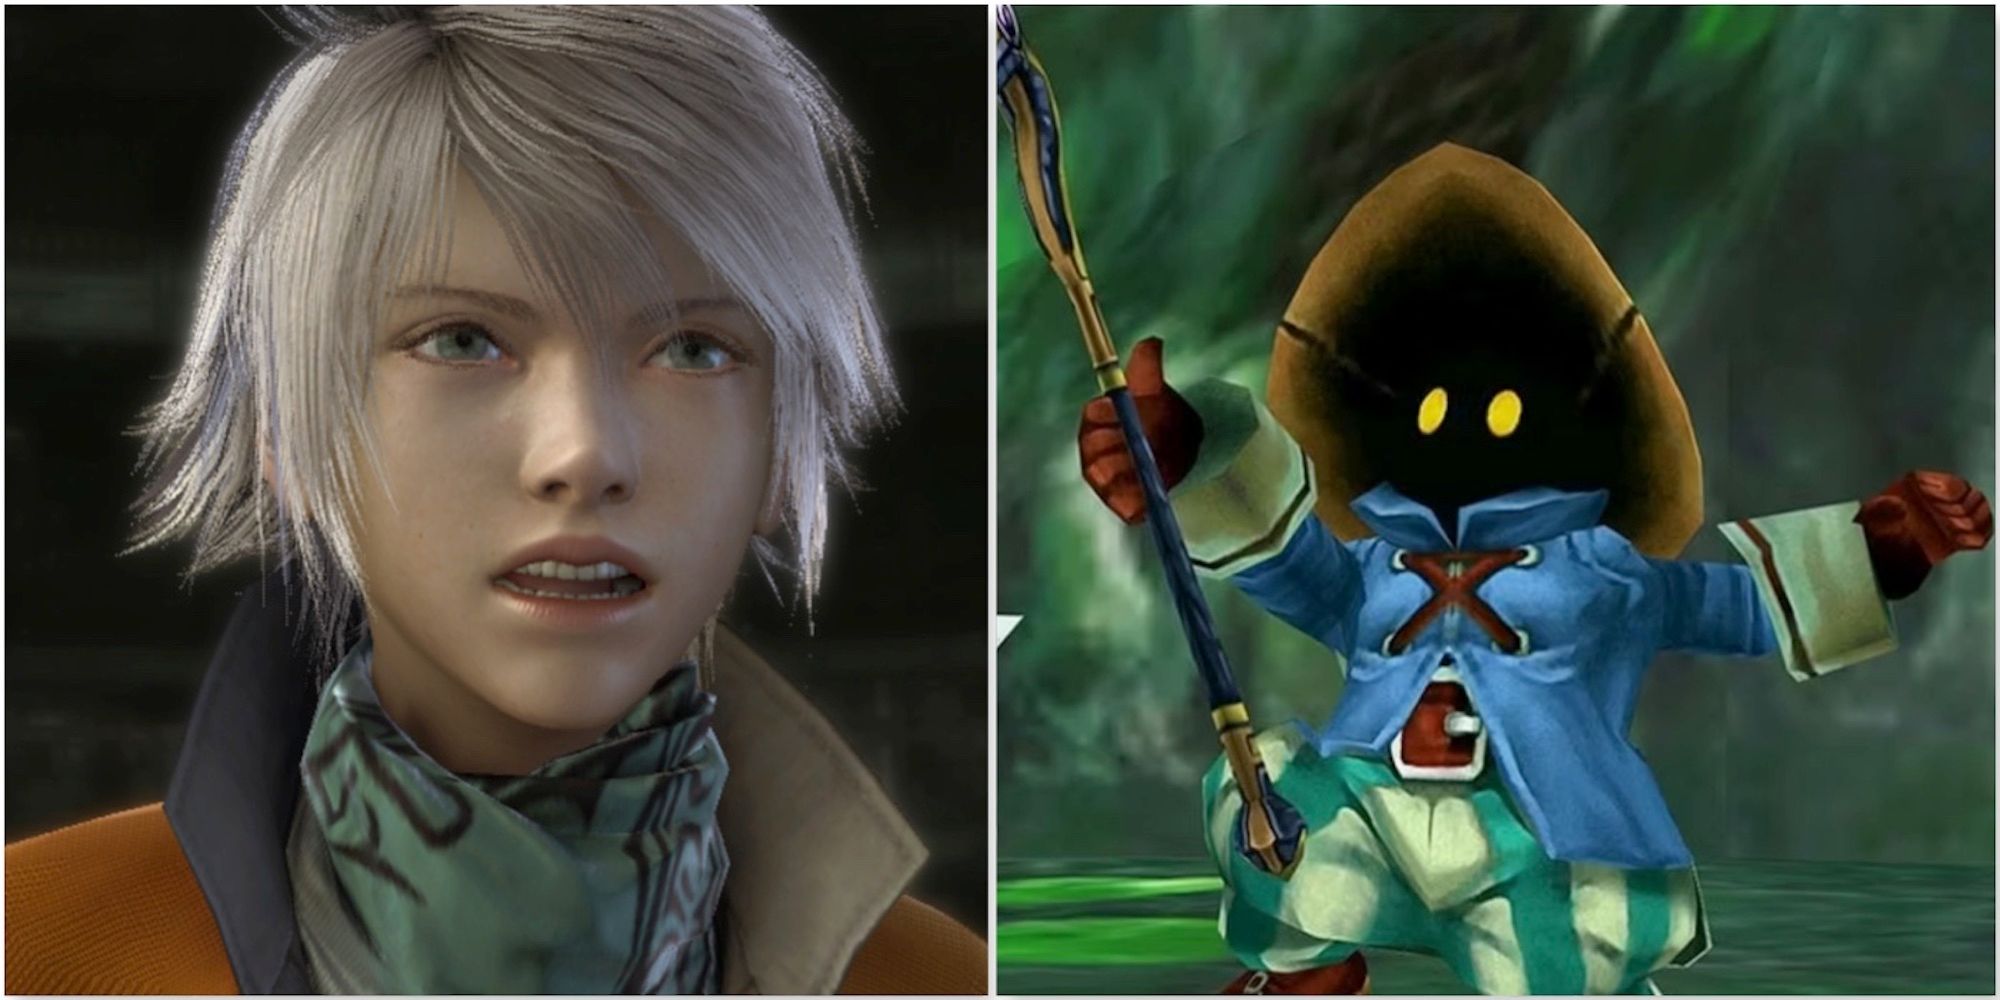 Hope from Final Fantasy 13 and Vivi from Final Fantasy 9